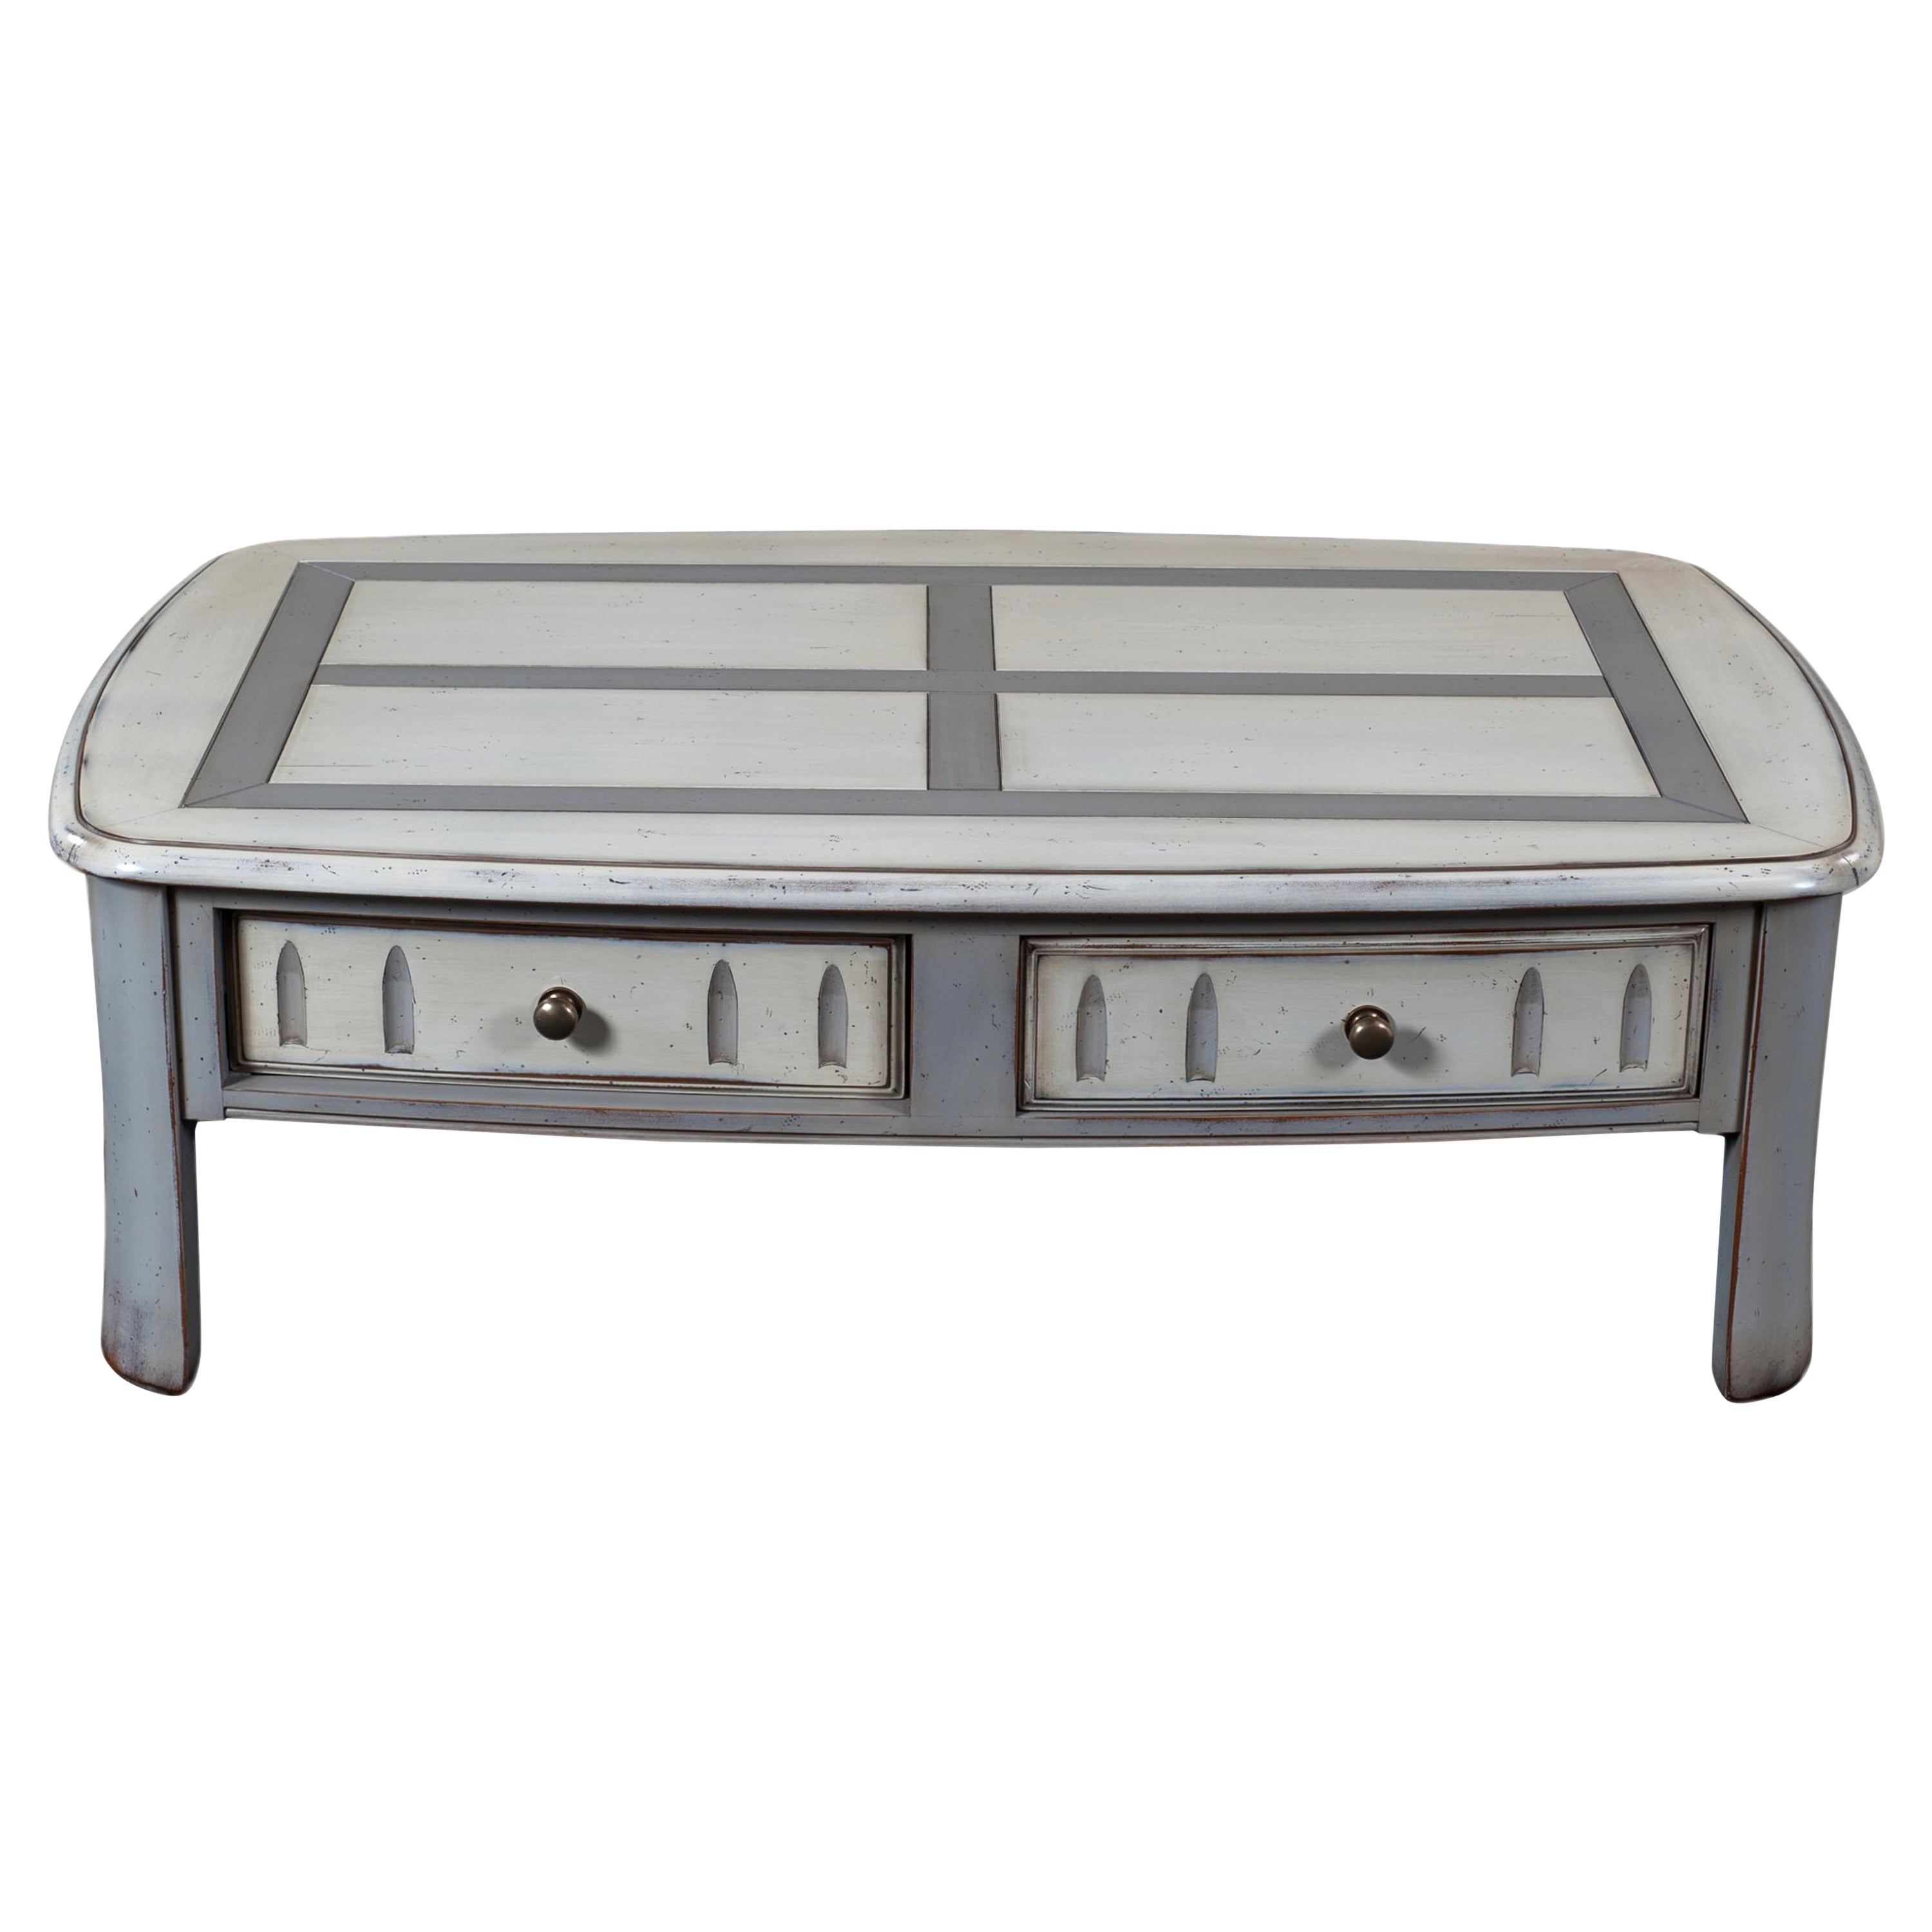 Cherry Coffee Table, One Drawer, French Countryside Style, Shabby Finish For Sale